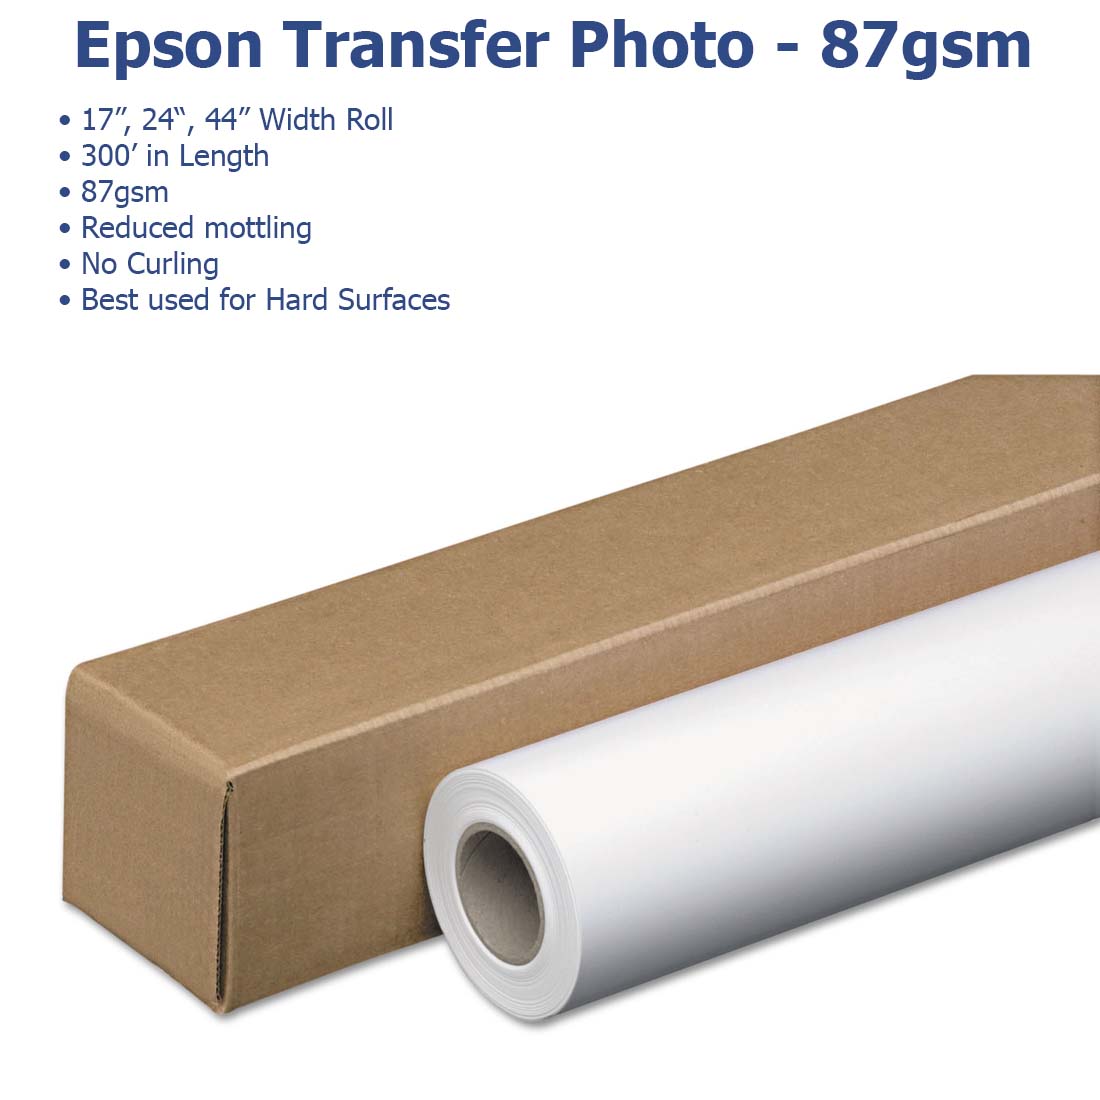 Epson® DS Transfer Photo Roll - Joto Imaging Supplies Canada